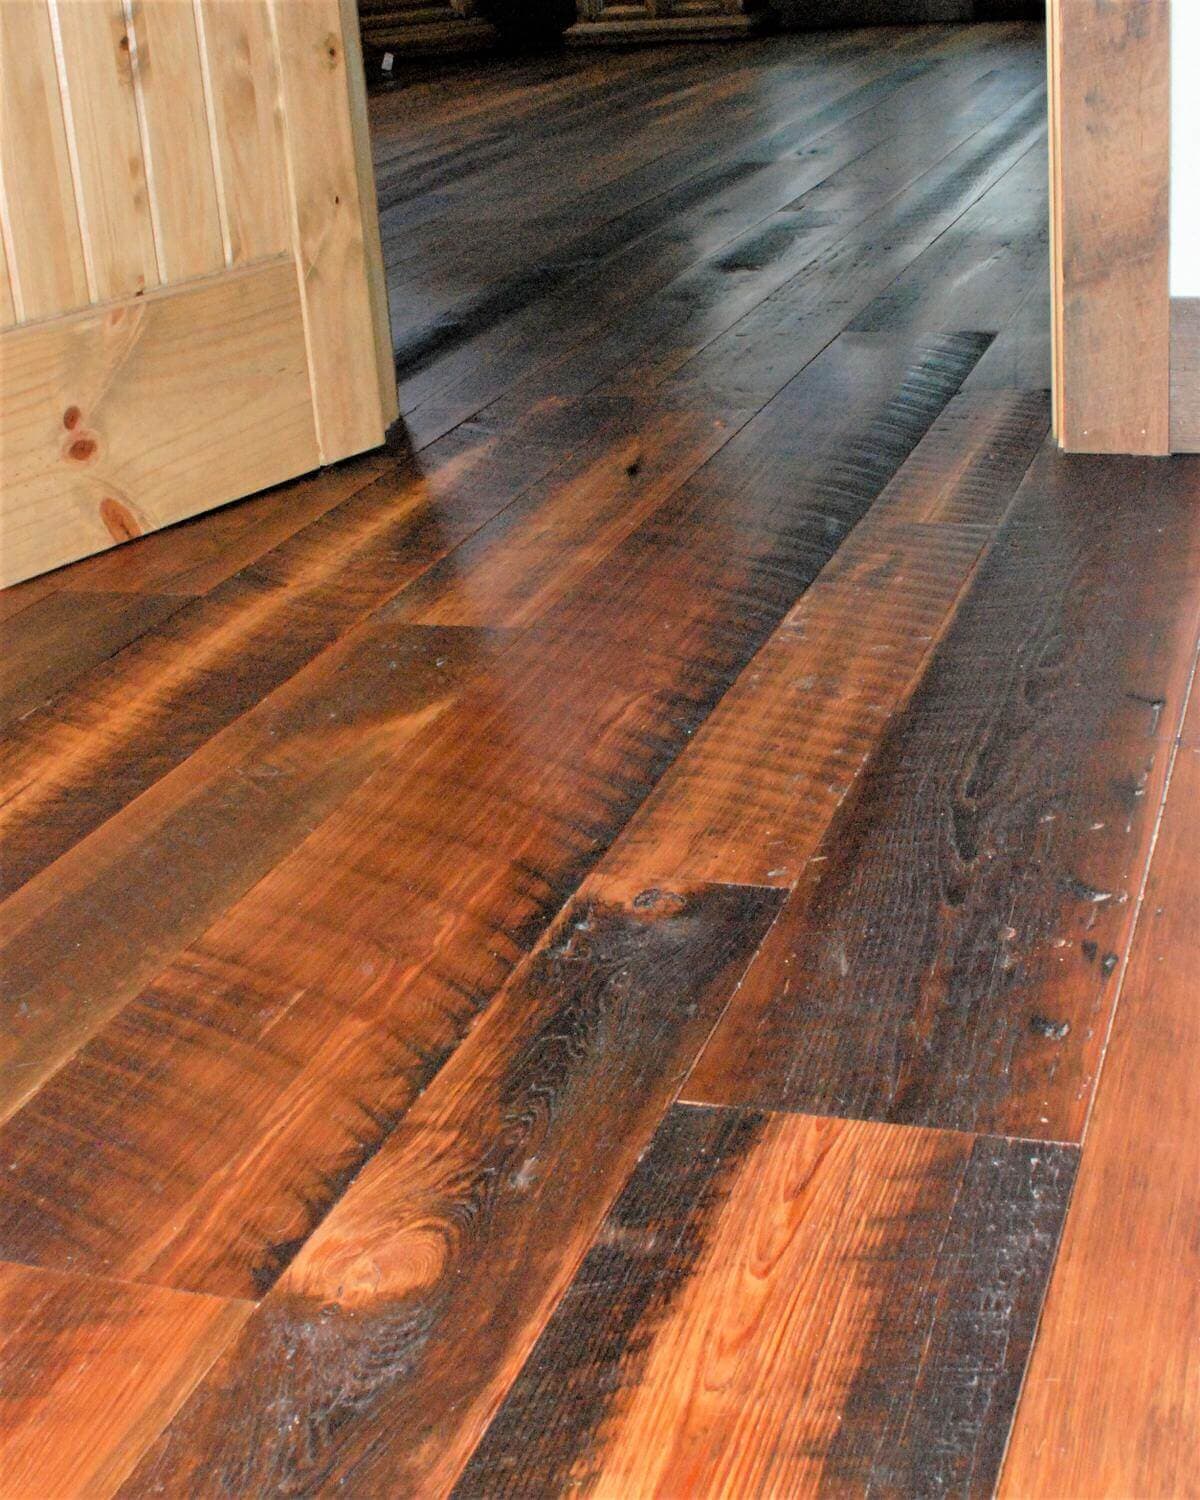 Heart pine character flooring in a hallway